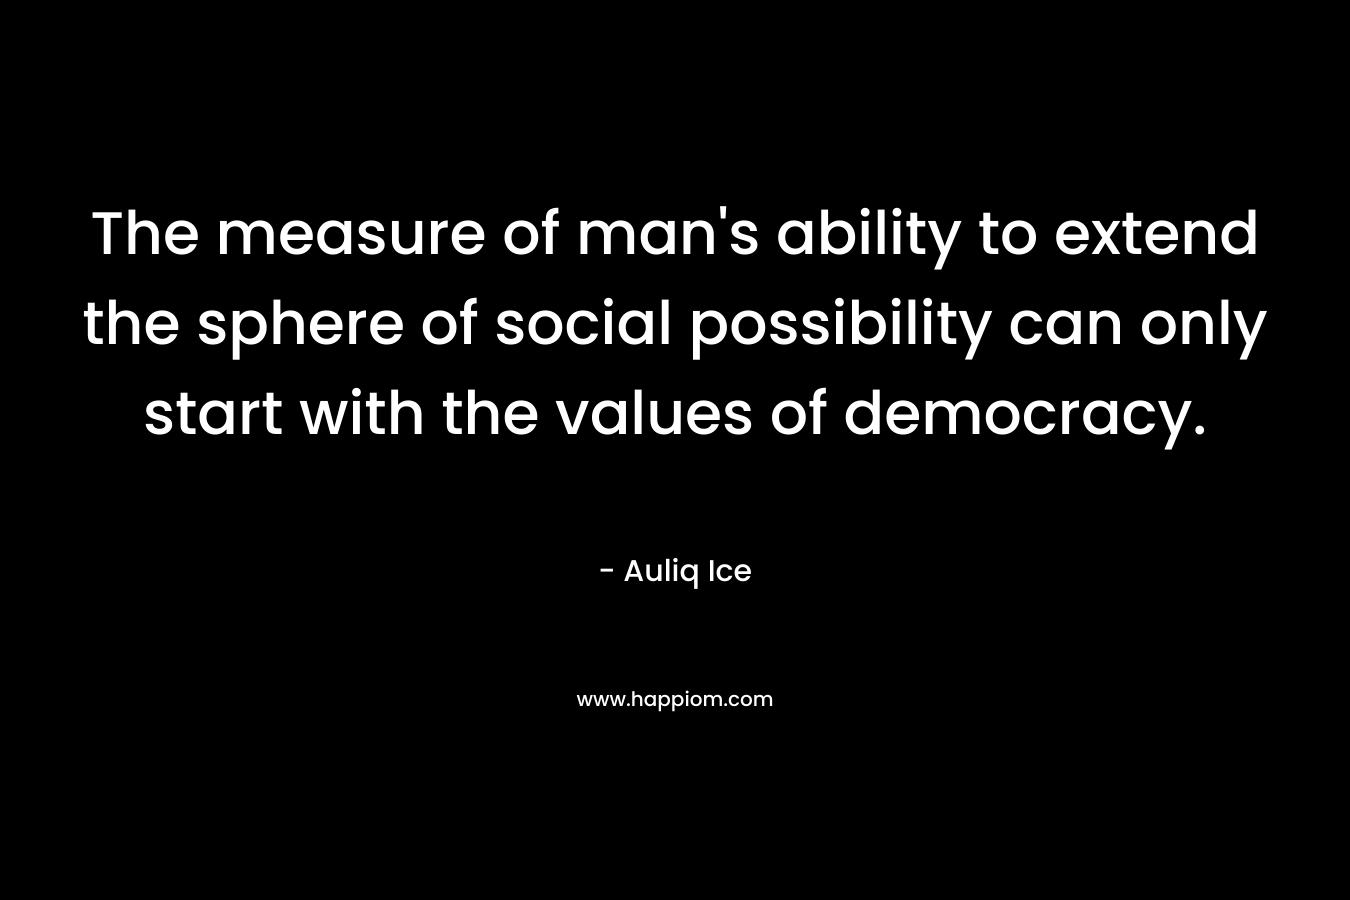 The measure of man’s ability to extend the sphere of social possibility can only start with the values of democracy. – Auliq Ice